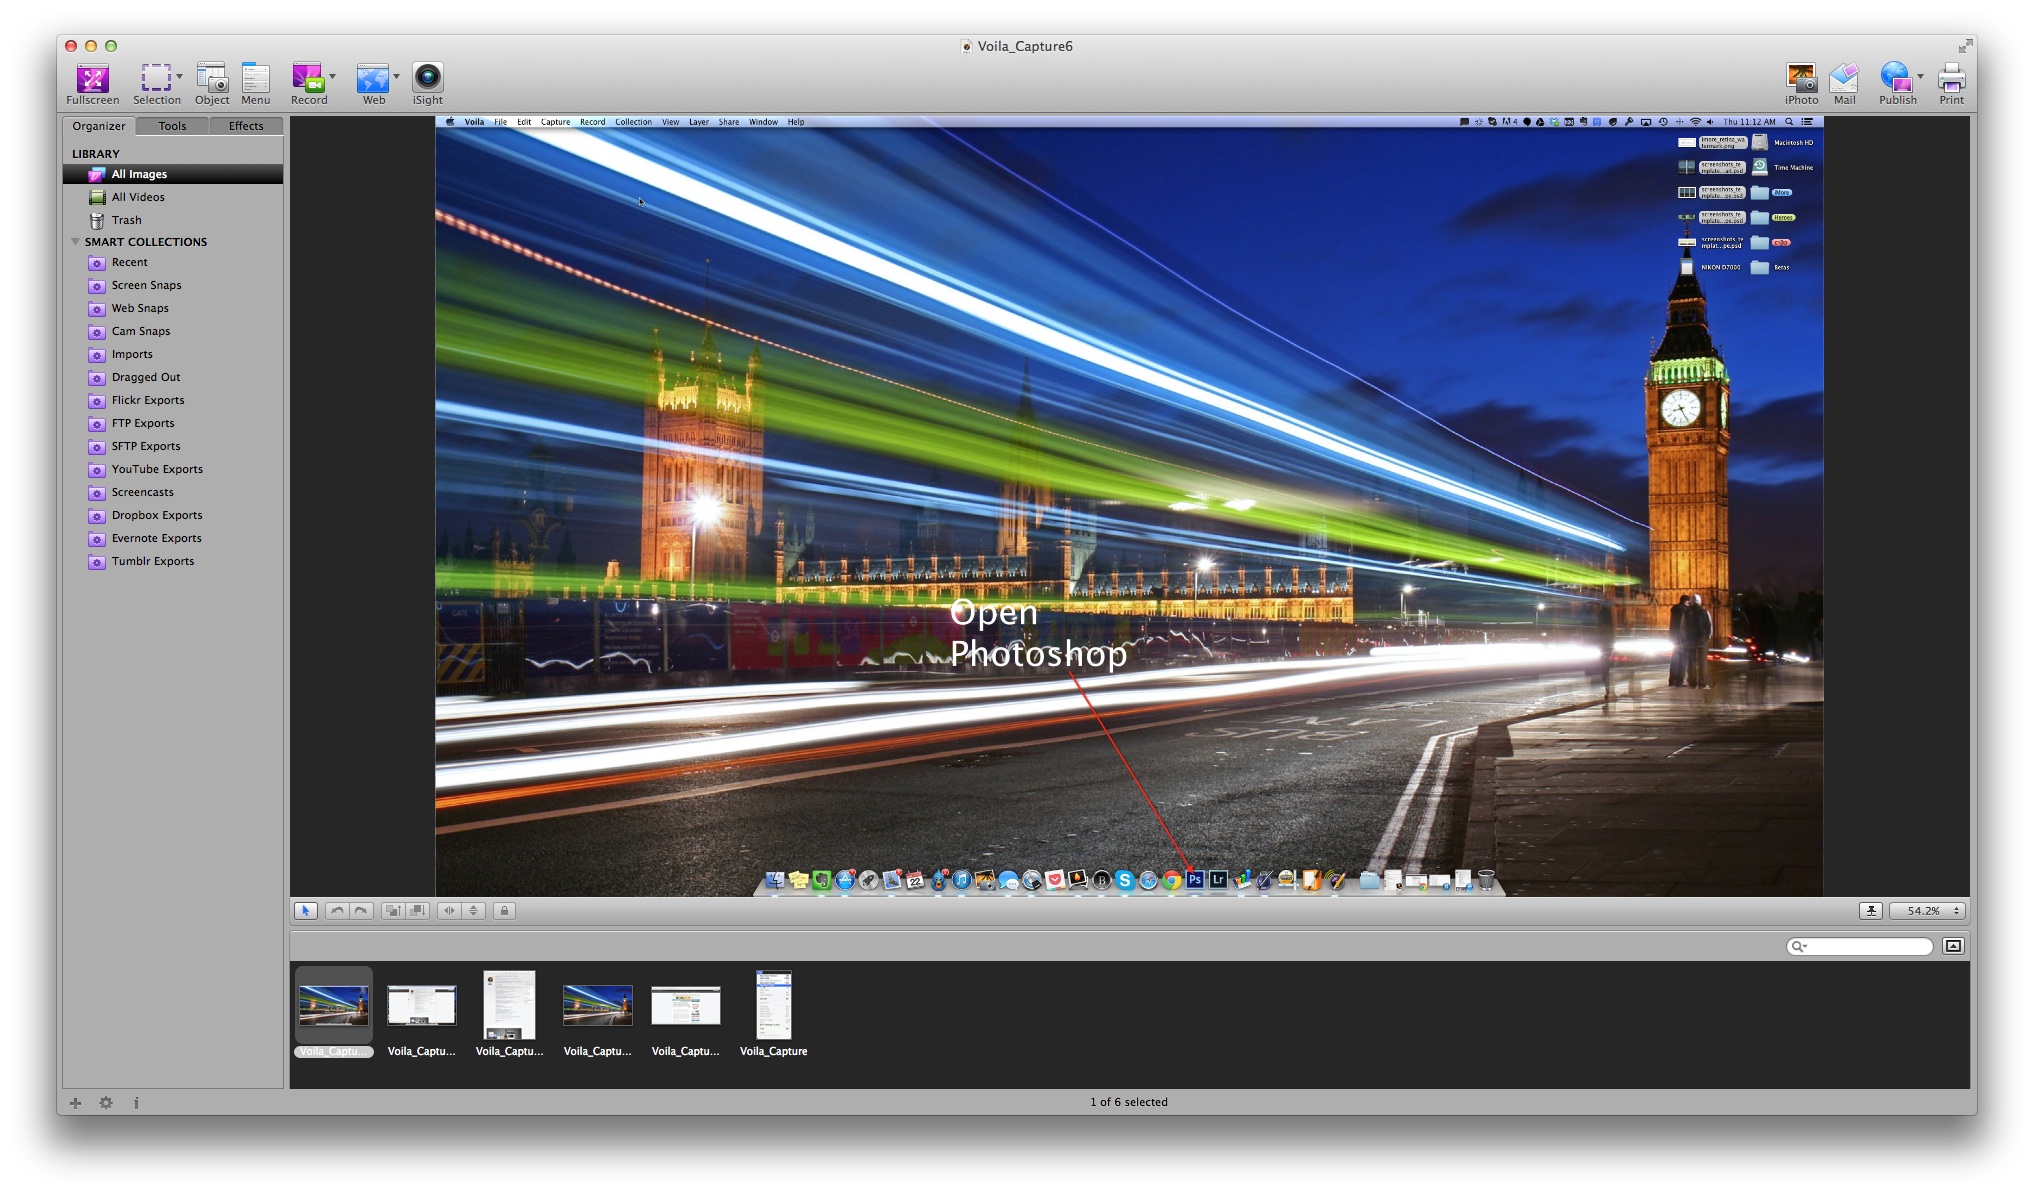 Best screen recording and capture apps for Mac: Voila